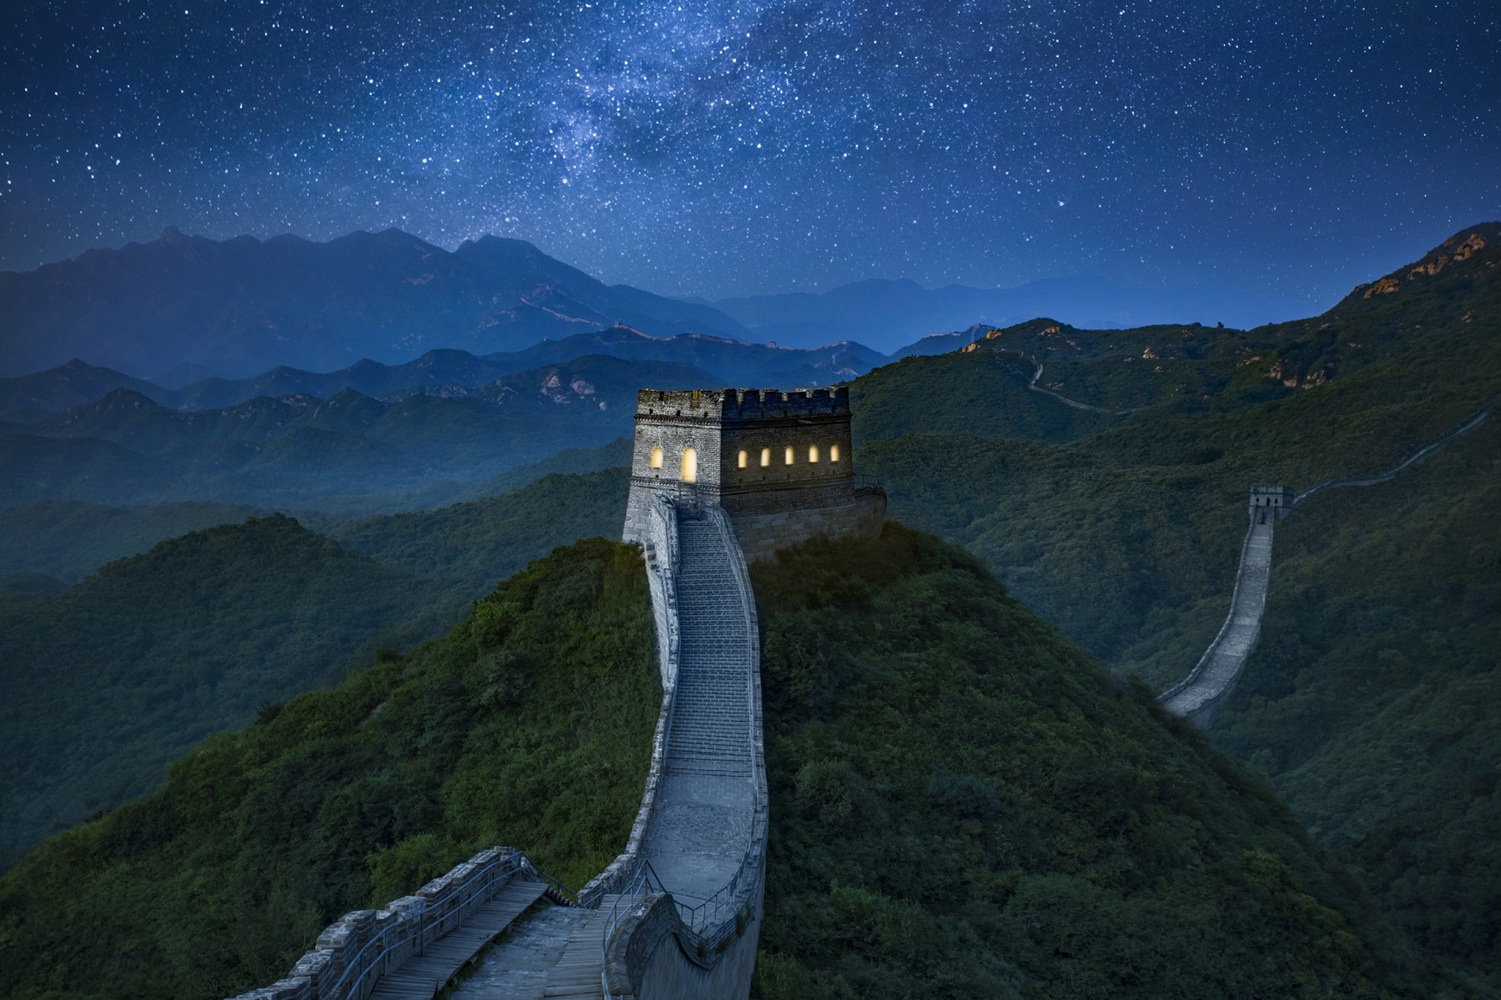 General 1501x1000 China Great Wall of China landscape architecture night starry night mountains landmark World Heritage Site